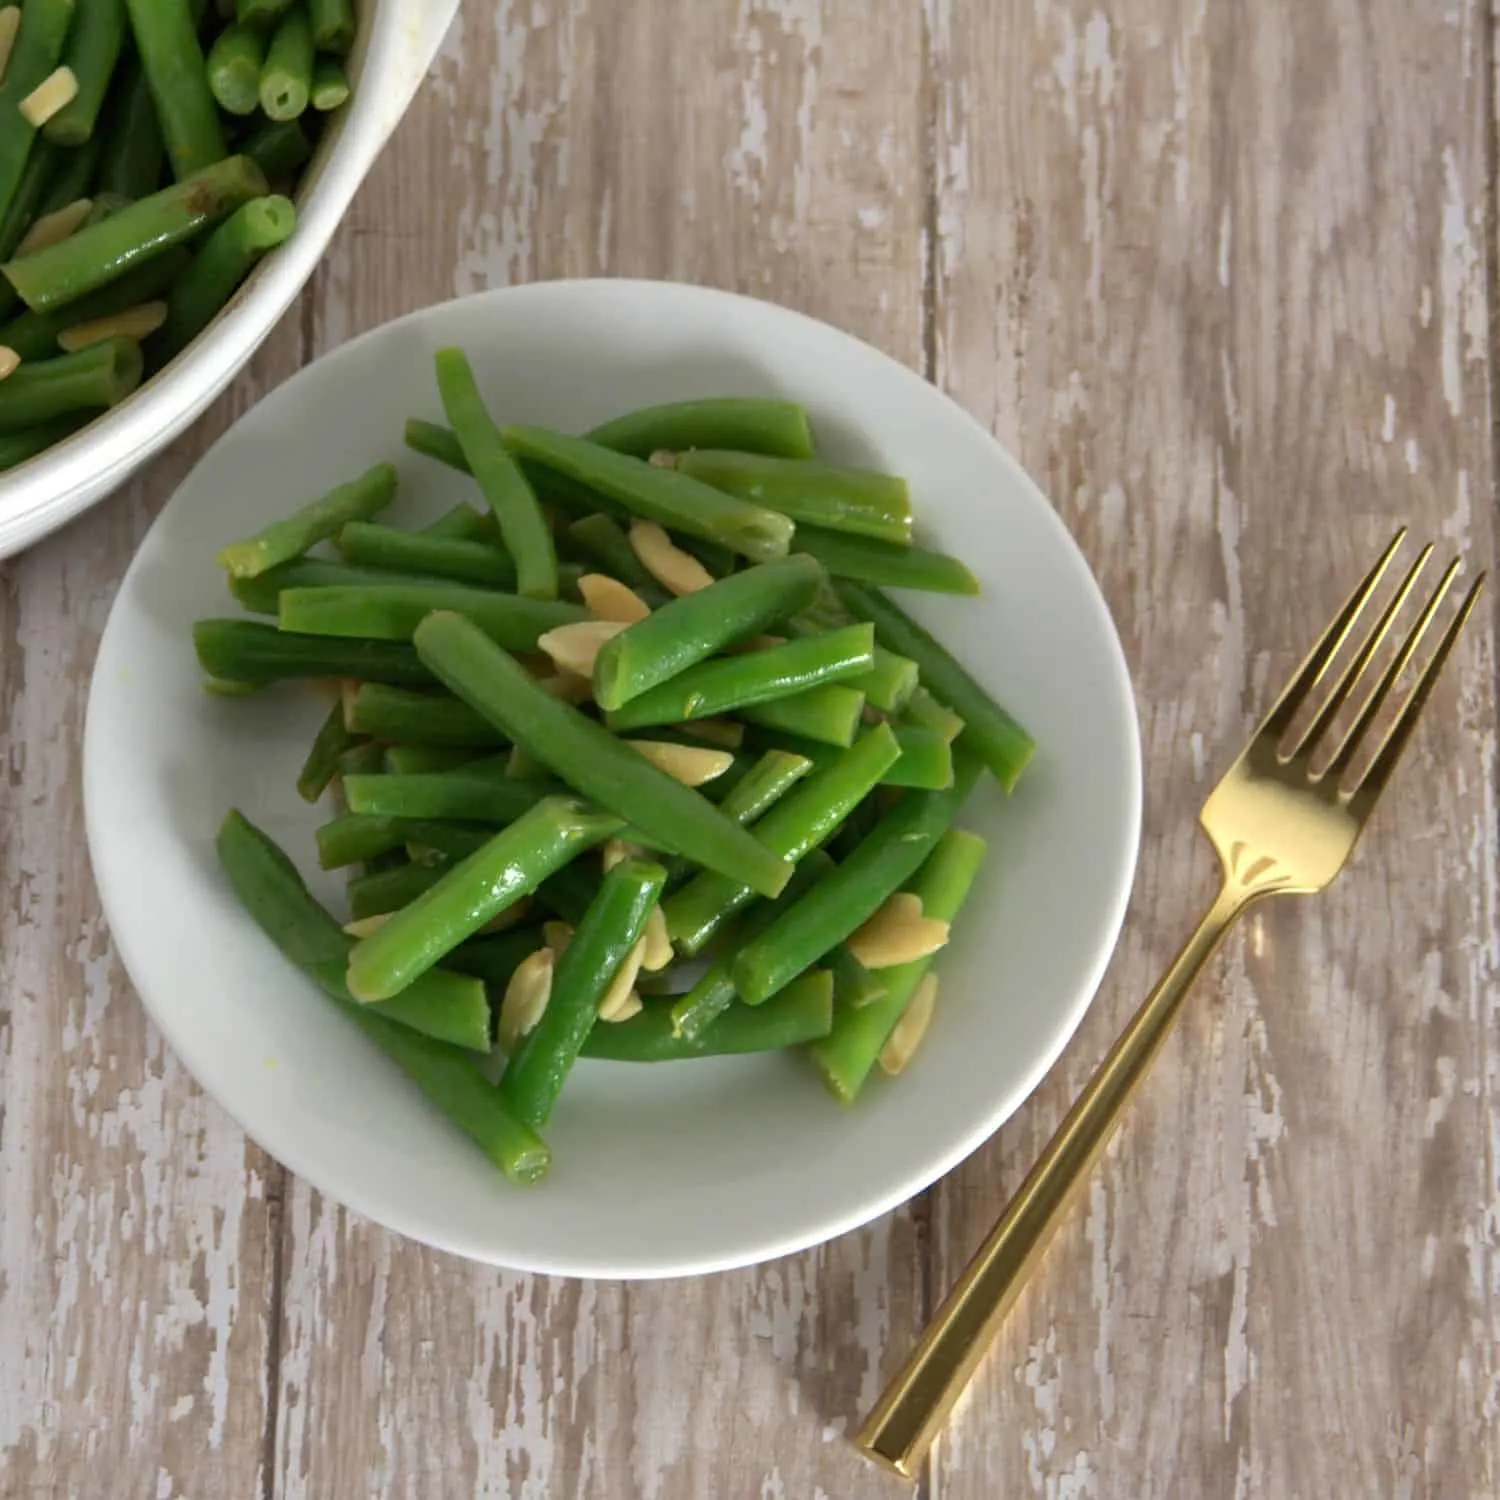 Ban boring green beans! Meyer Lemon Green Beans with Almonds - healthy and so easy to make! #paleo #primal #Whole30